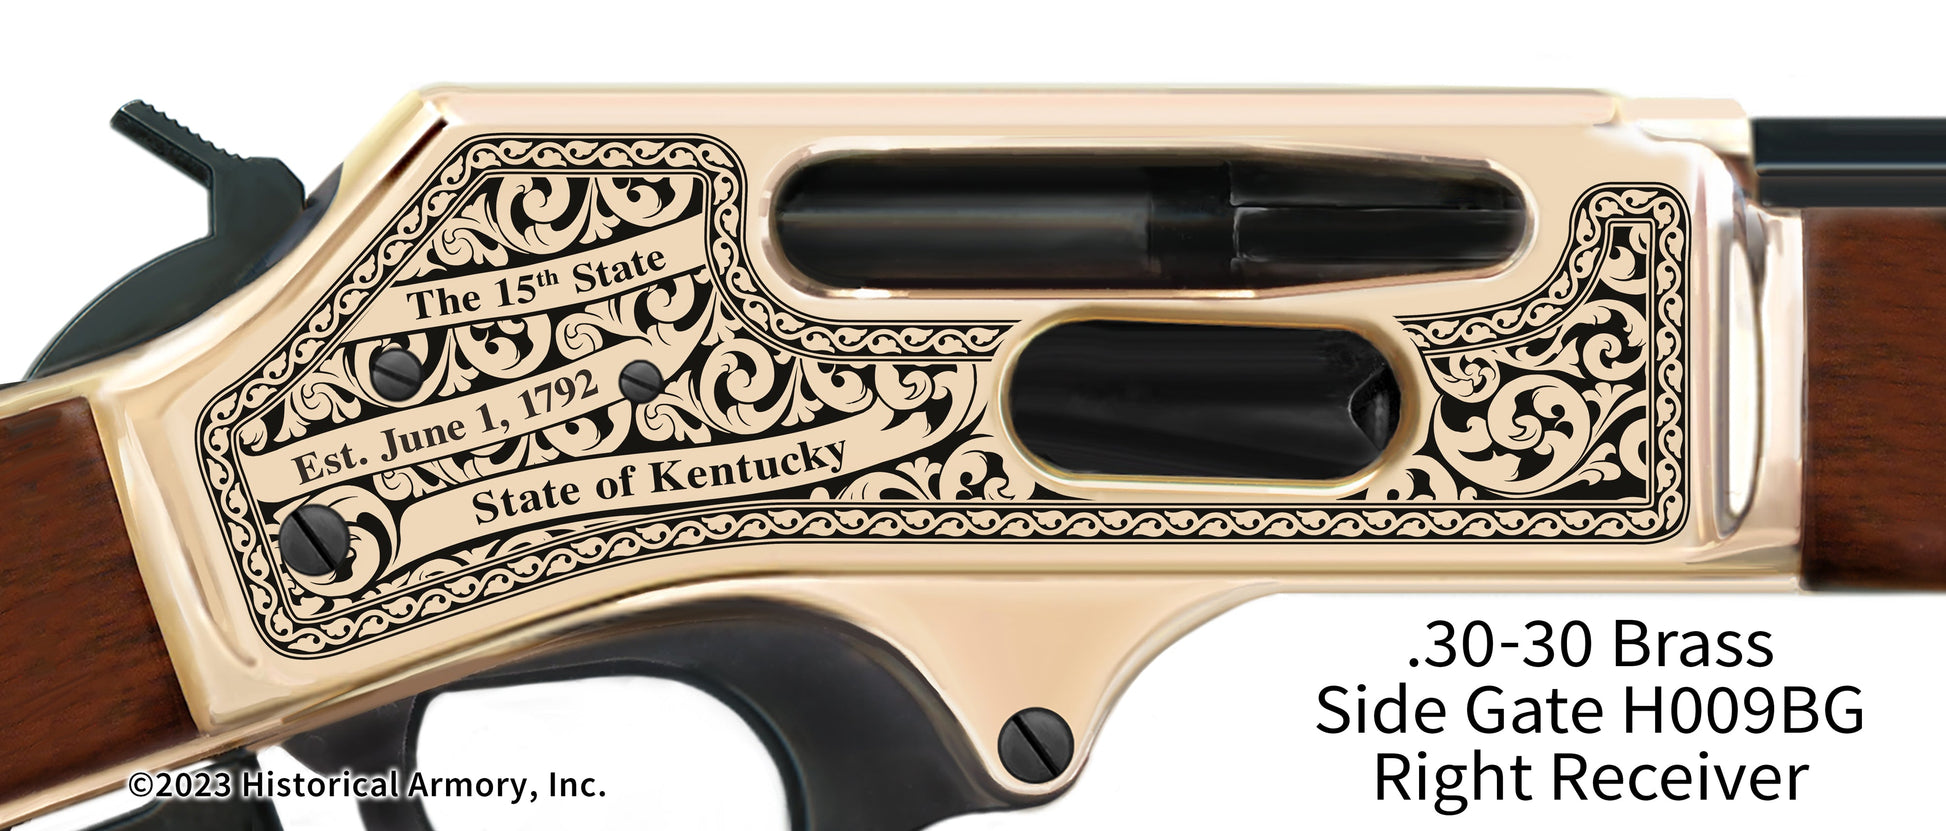 Simpson County Kentucky Engraved Henry .30-30 Brass Side Gate Rifle